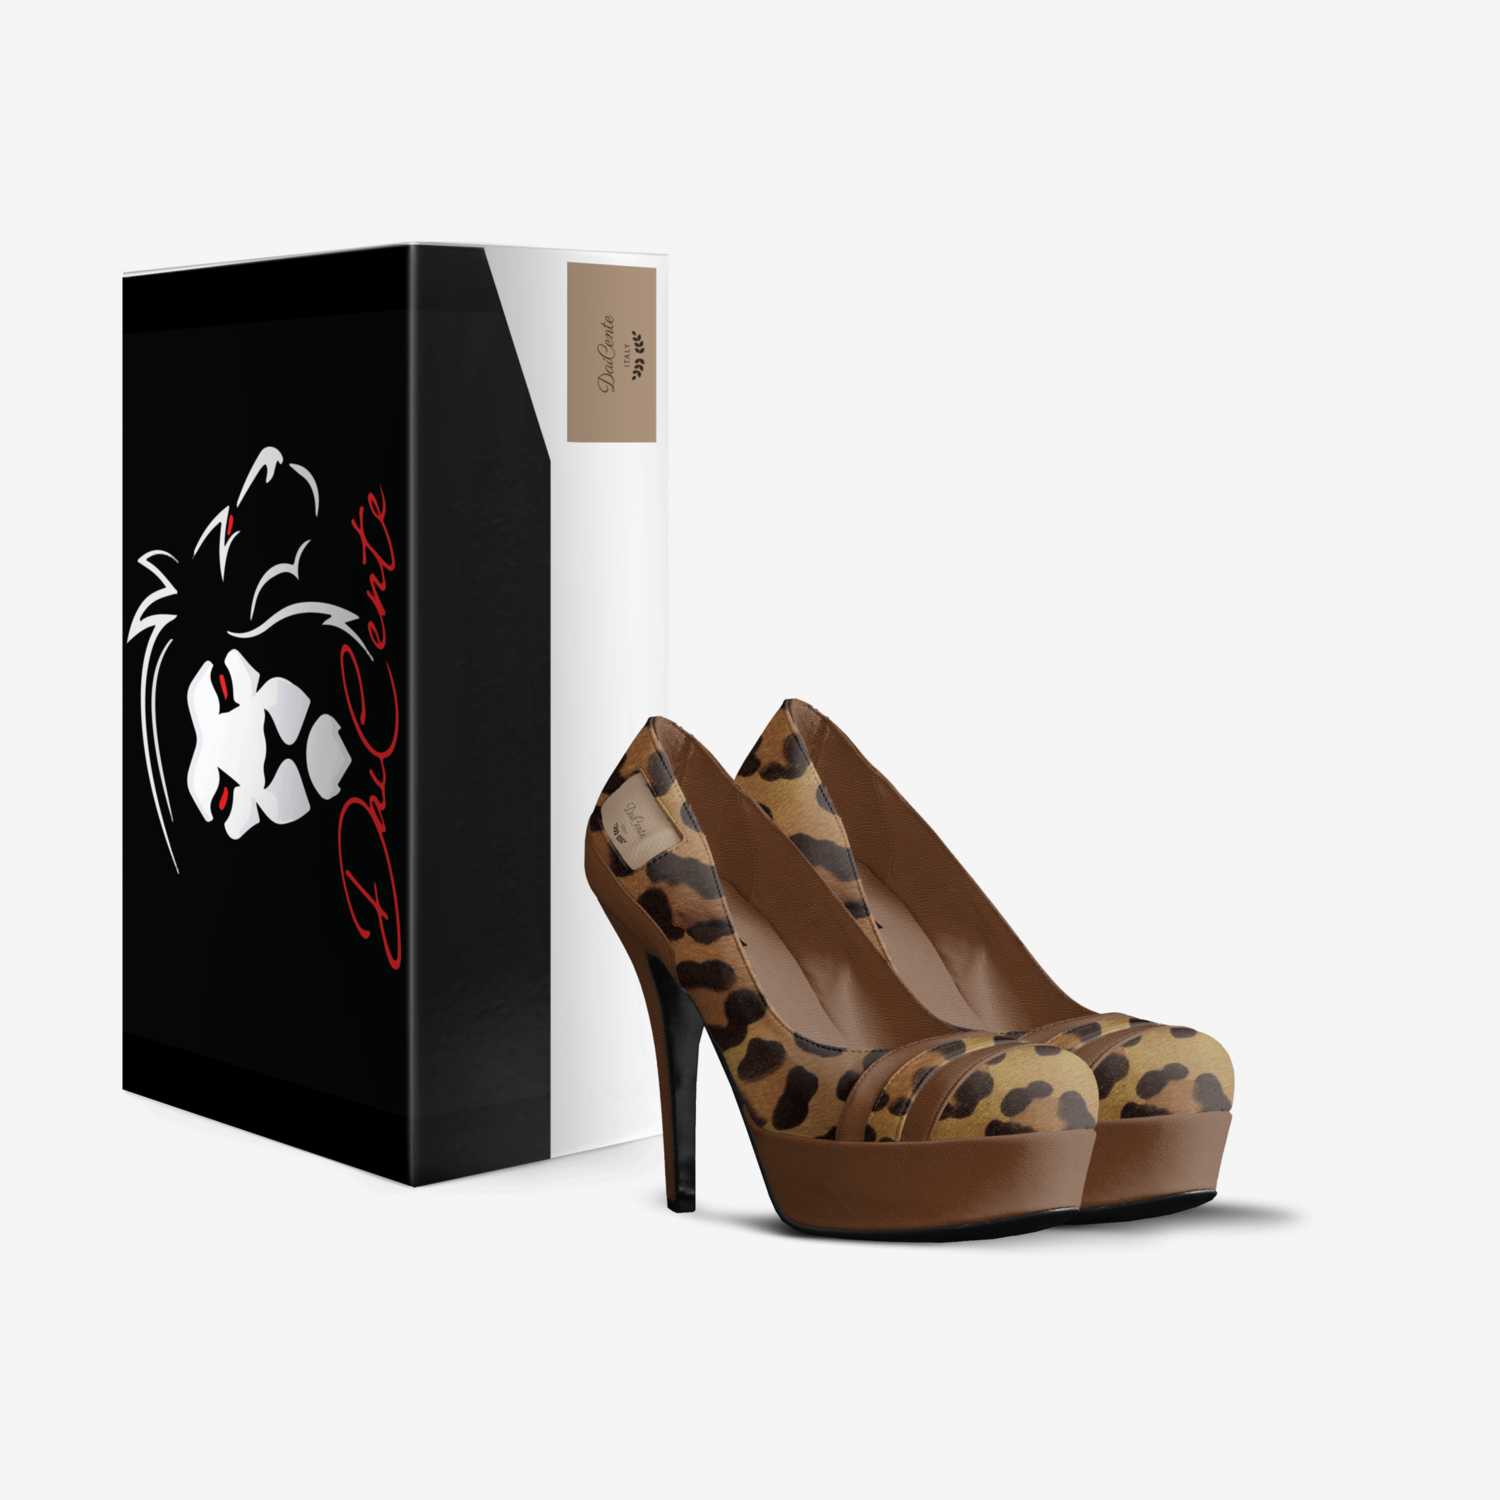 Faith custom made in Italy shoes by Candice Hackett | Box view